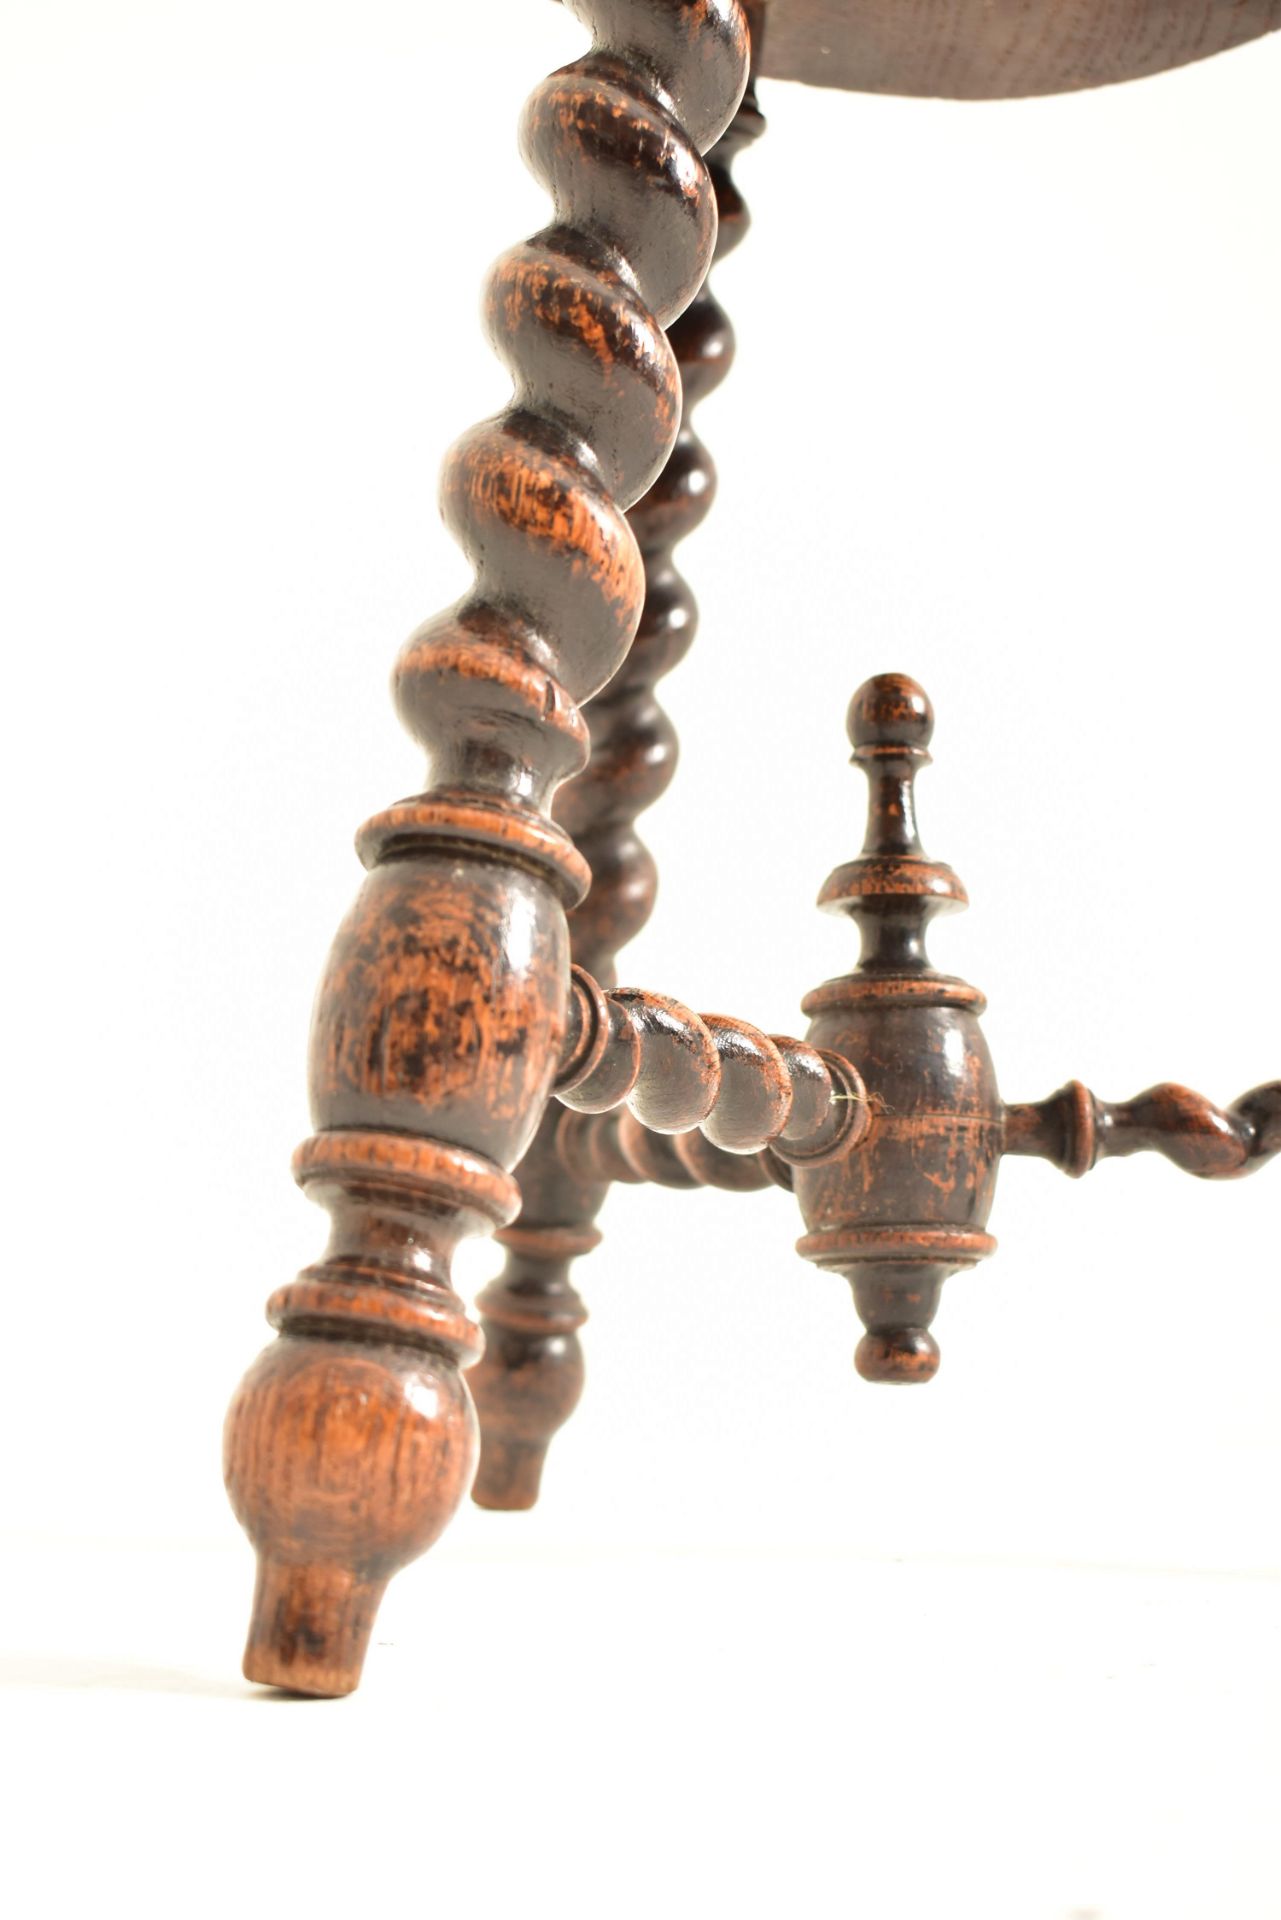 FRENCH 19TH CENTURY CARVED OAK BARLEY TWIST MILKING STOOL - Image 3 of 4